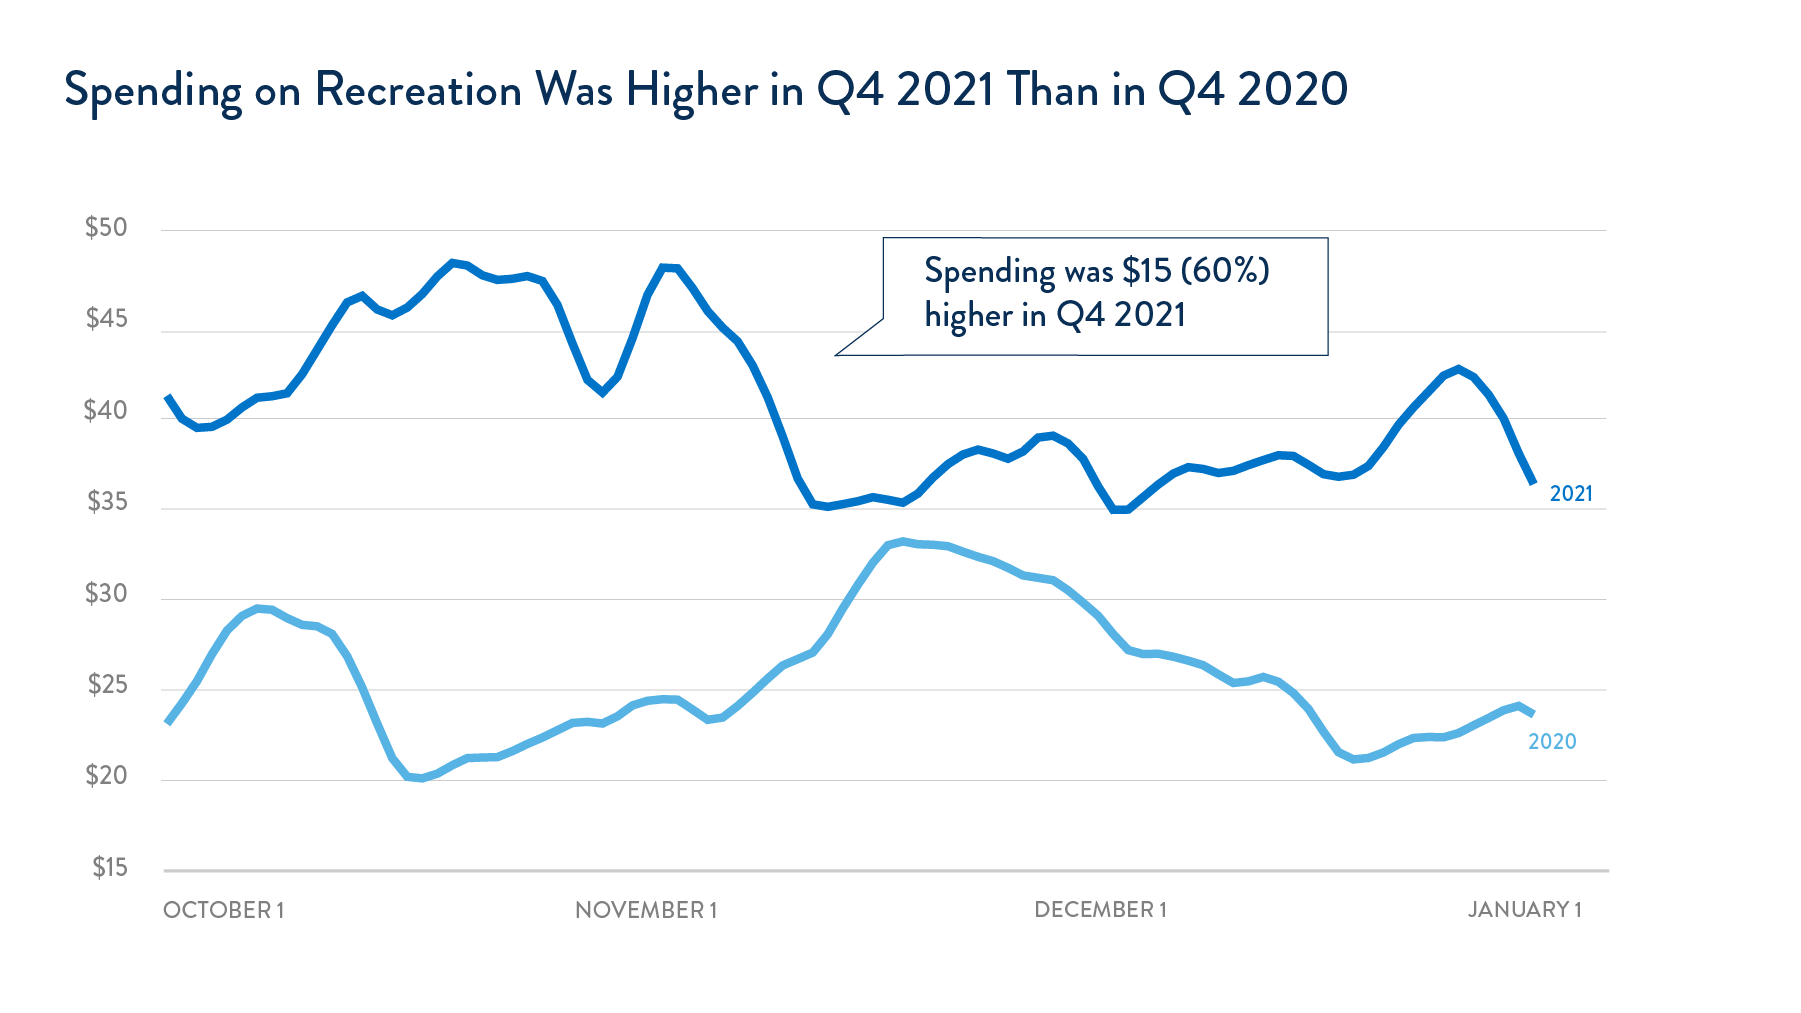 Spending on Recreation Was Higher in Q4 2021 Than in Q4 2020